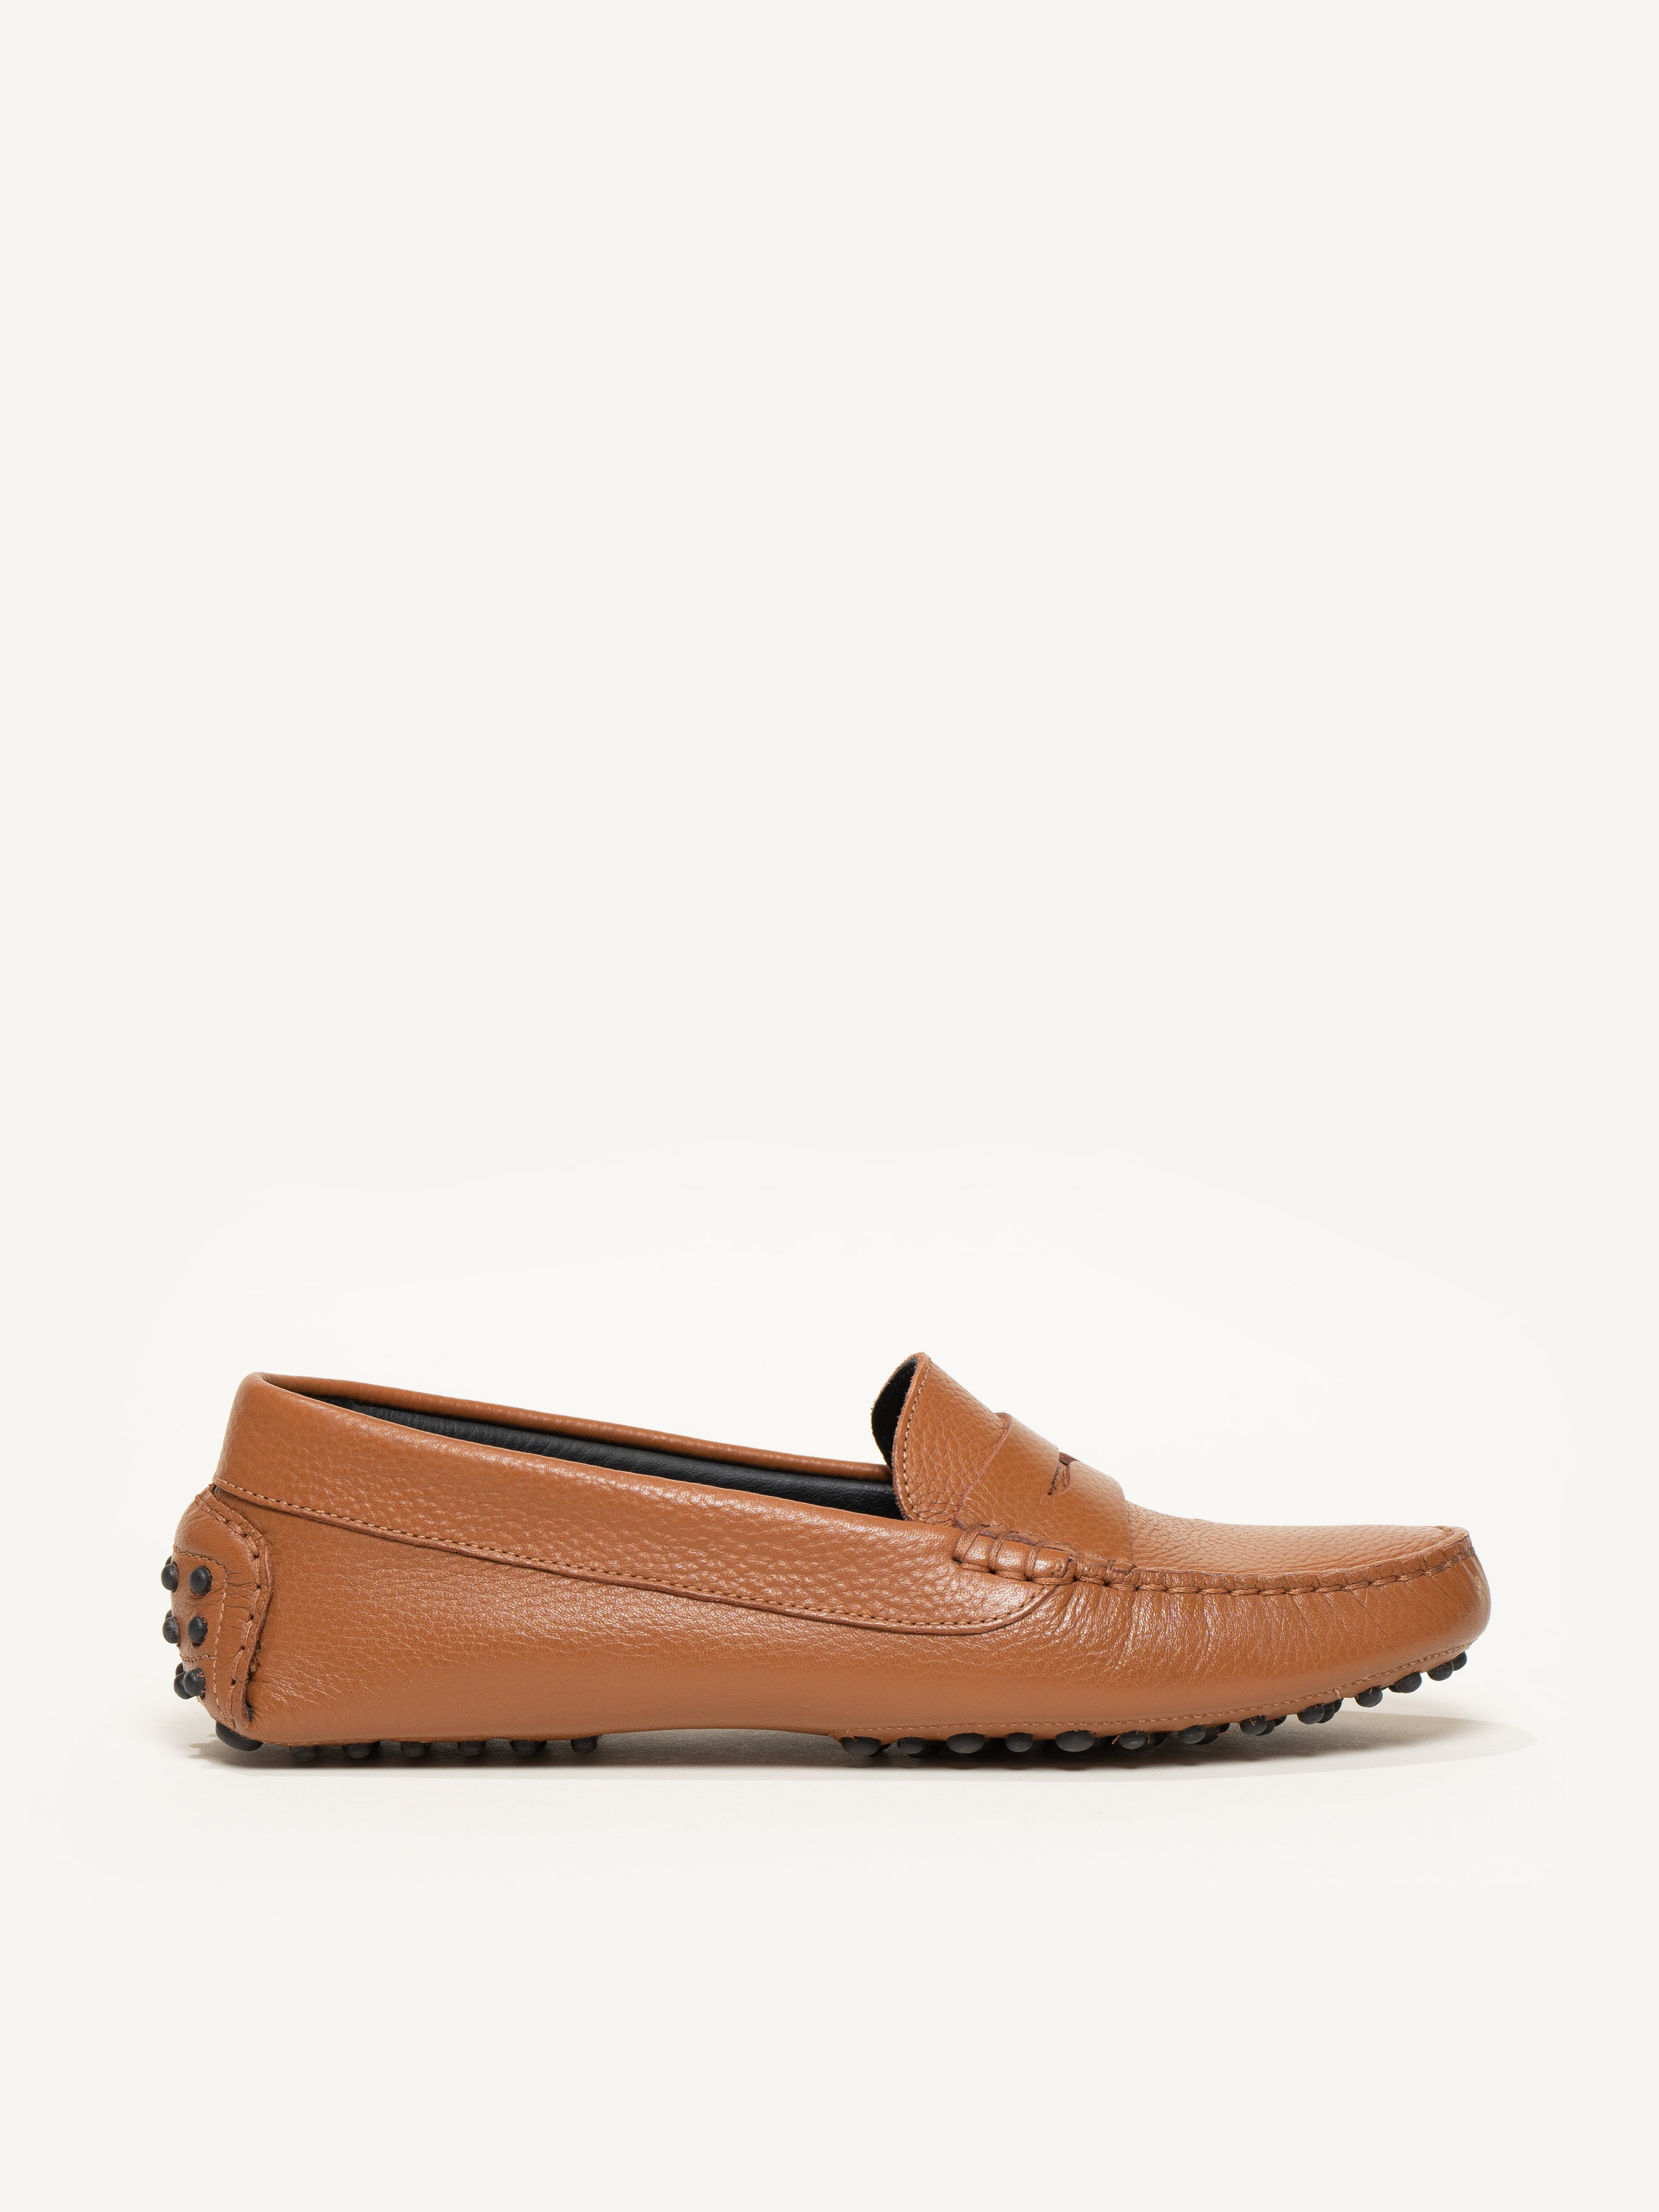 The Pastoso | Soft Tumbled Leather Driver Moccasin | M.Gemi